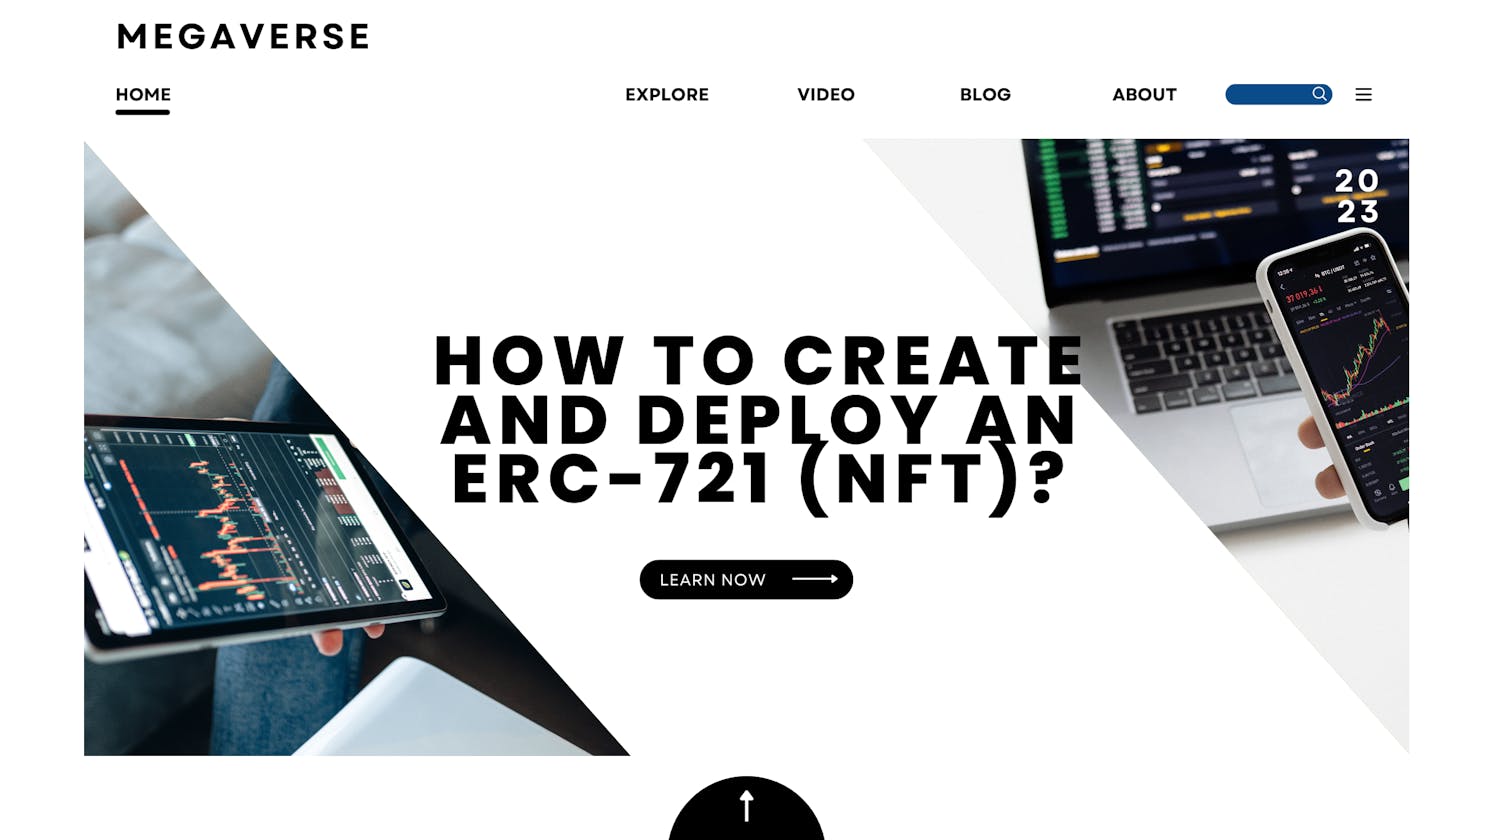 How to create and deploy an ERC-721 (NFT)?